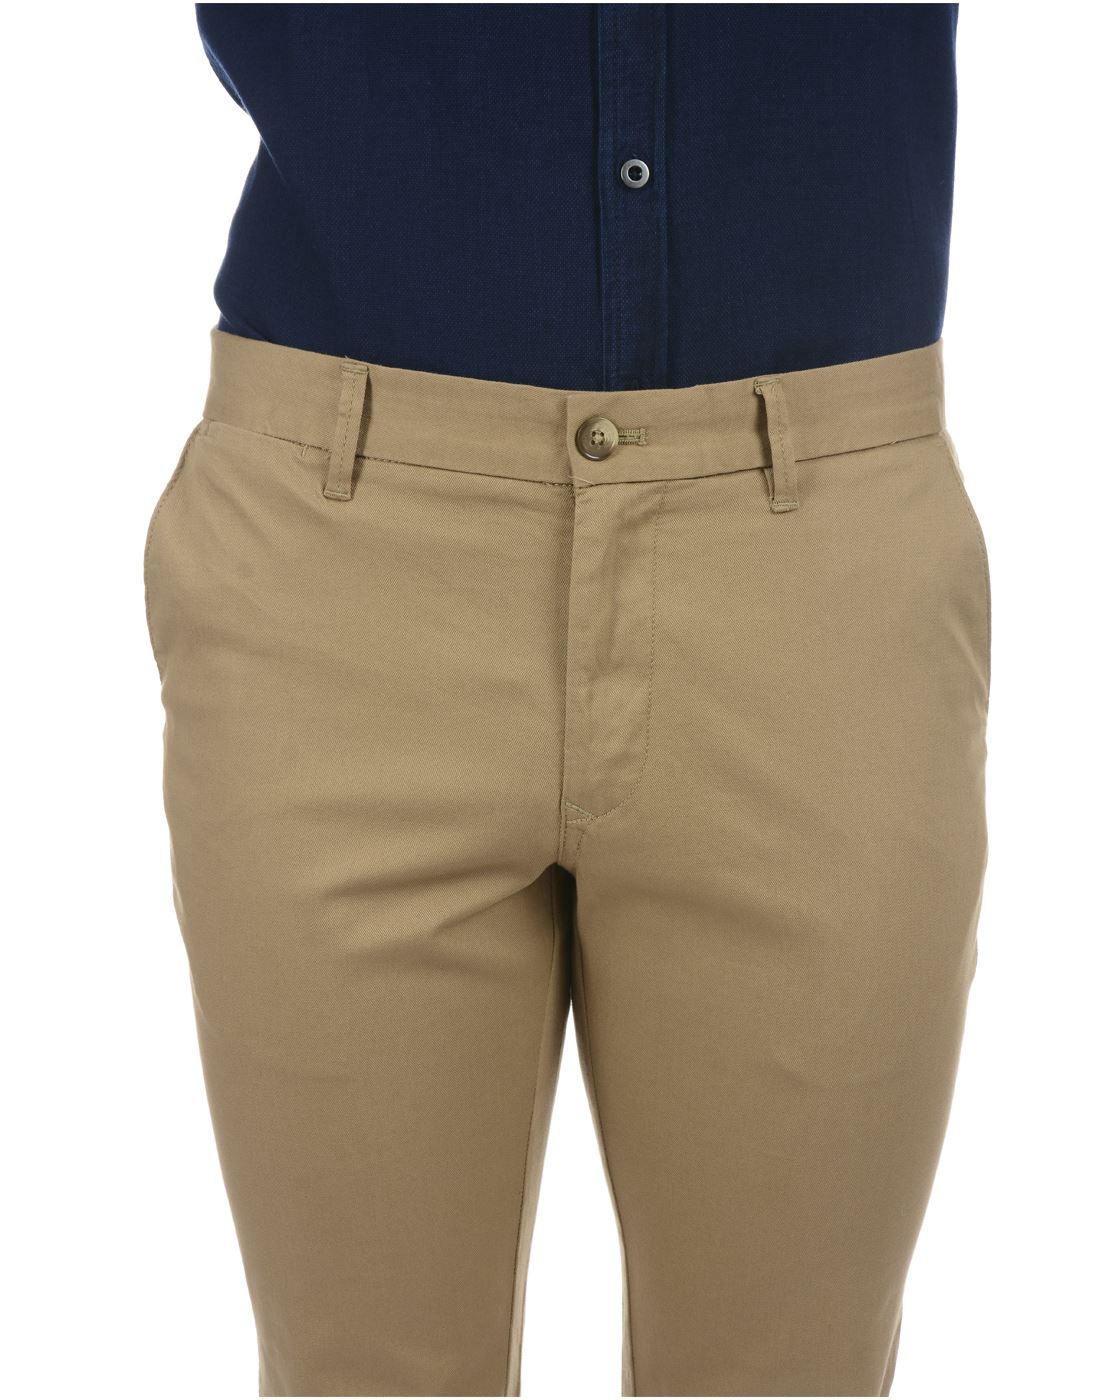 Buy Indian Terrain Beige Flat Front Trousers from top Brands at Best Prices  Online in India | Tata CLiQ